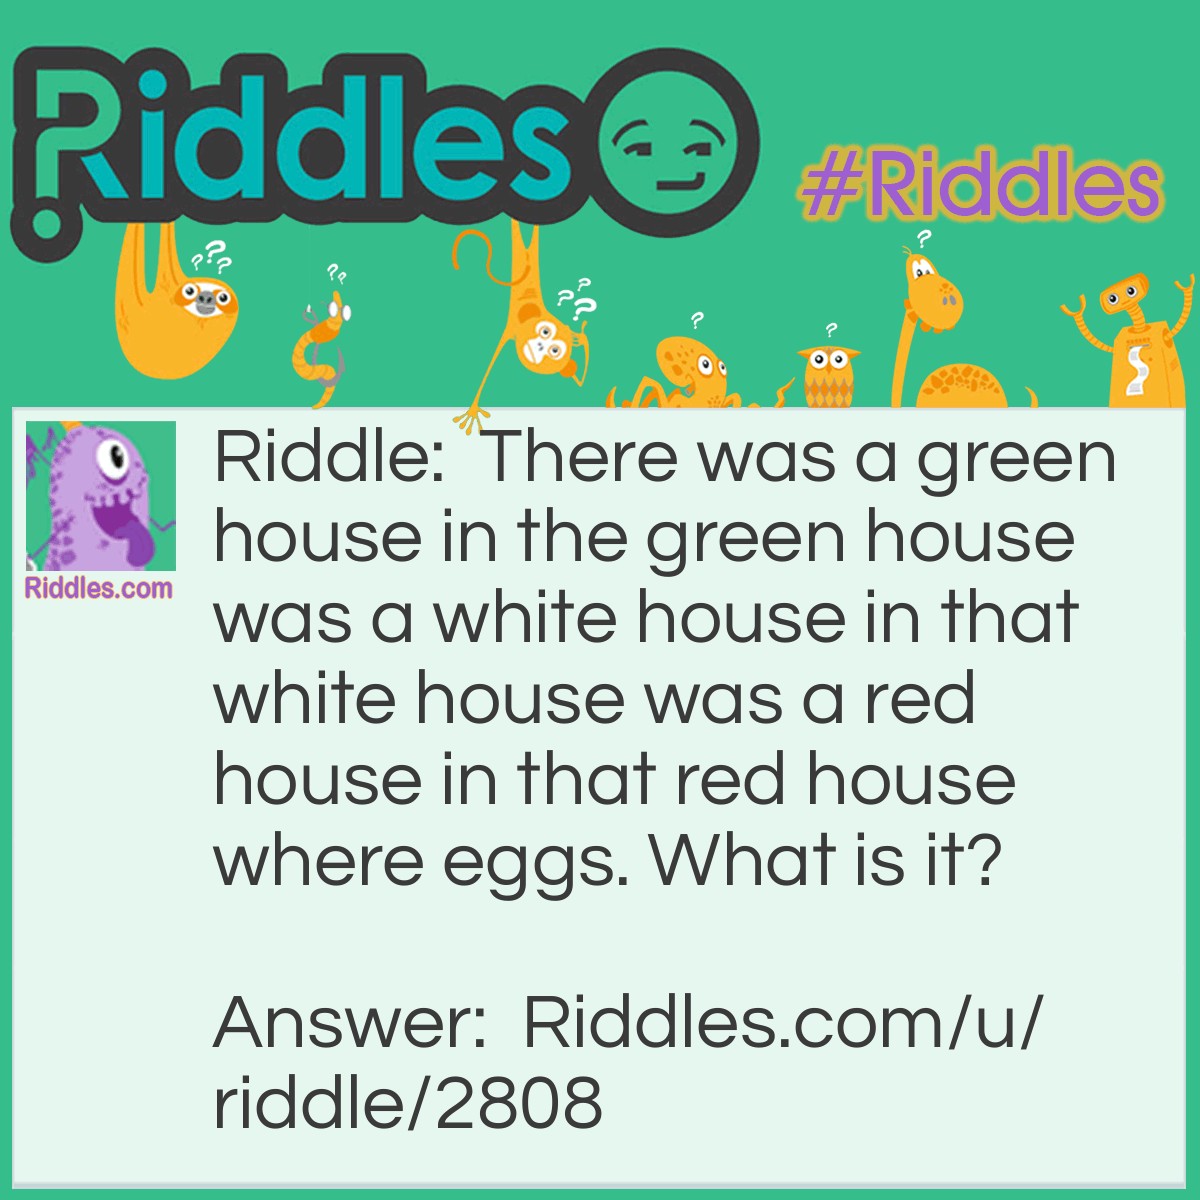 Riddle: There was a green house in the green house was a white house in that white house was a red house in that red house where eggs. What is it? Answer: A watermelon.